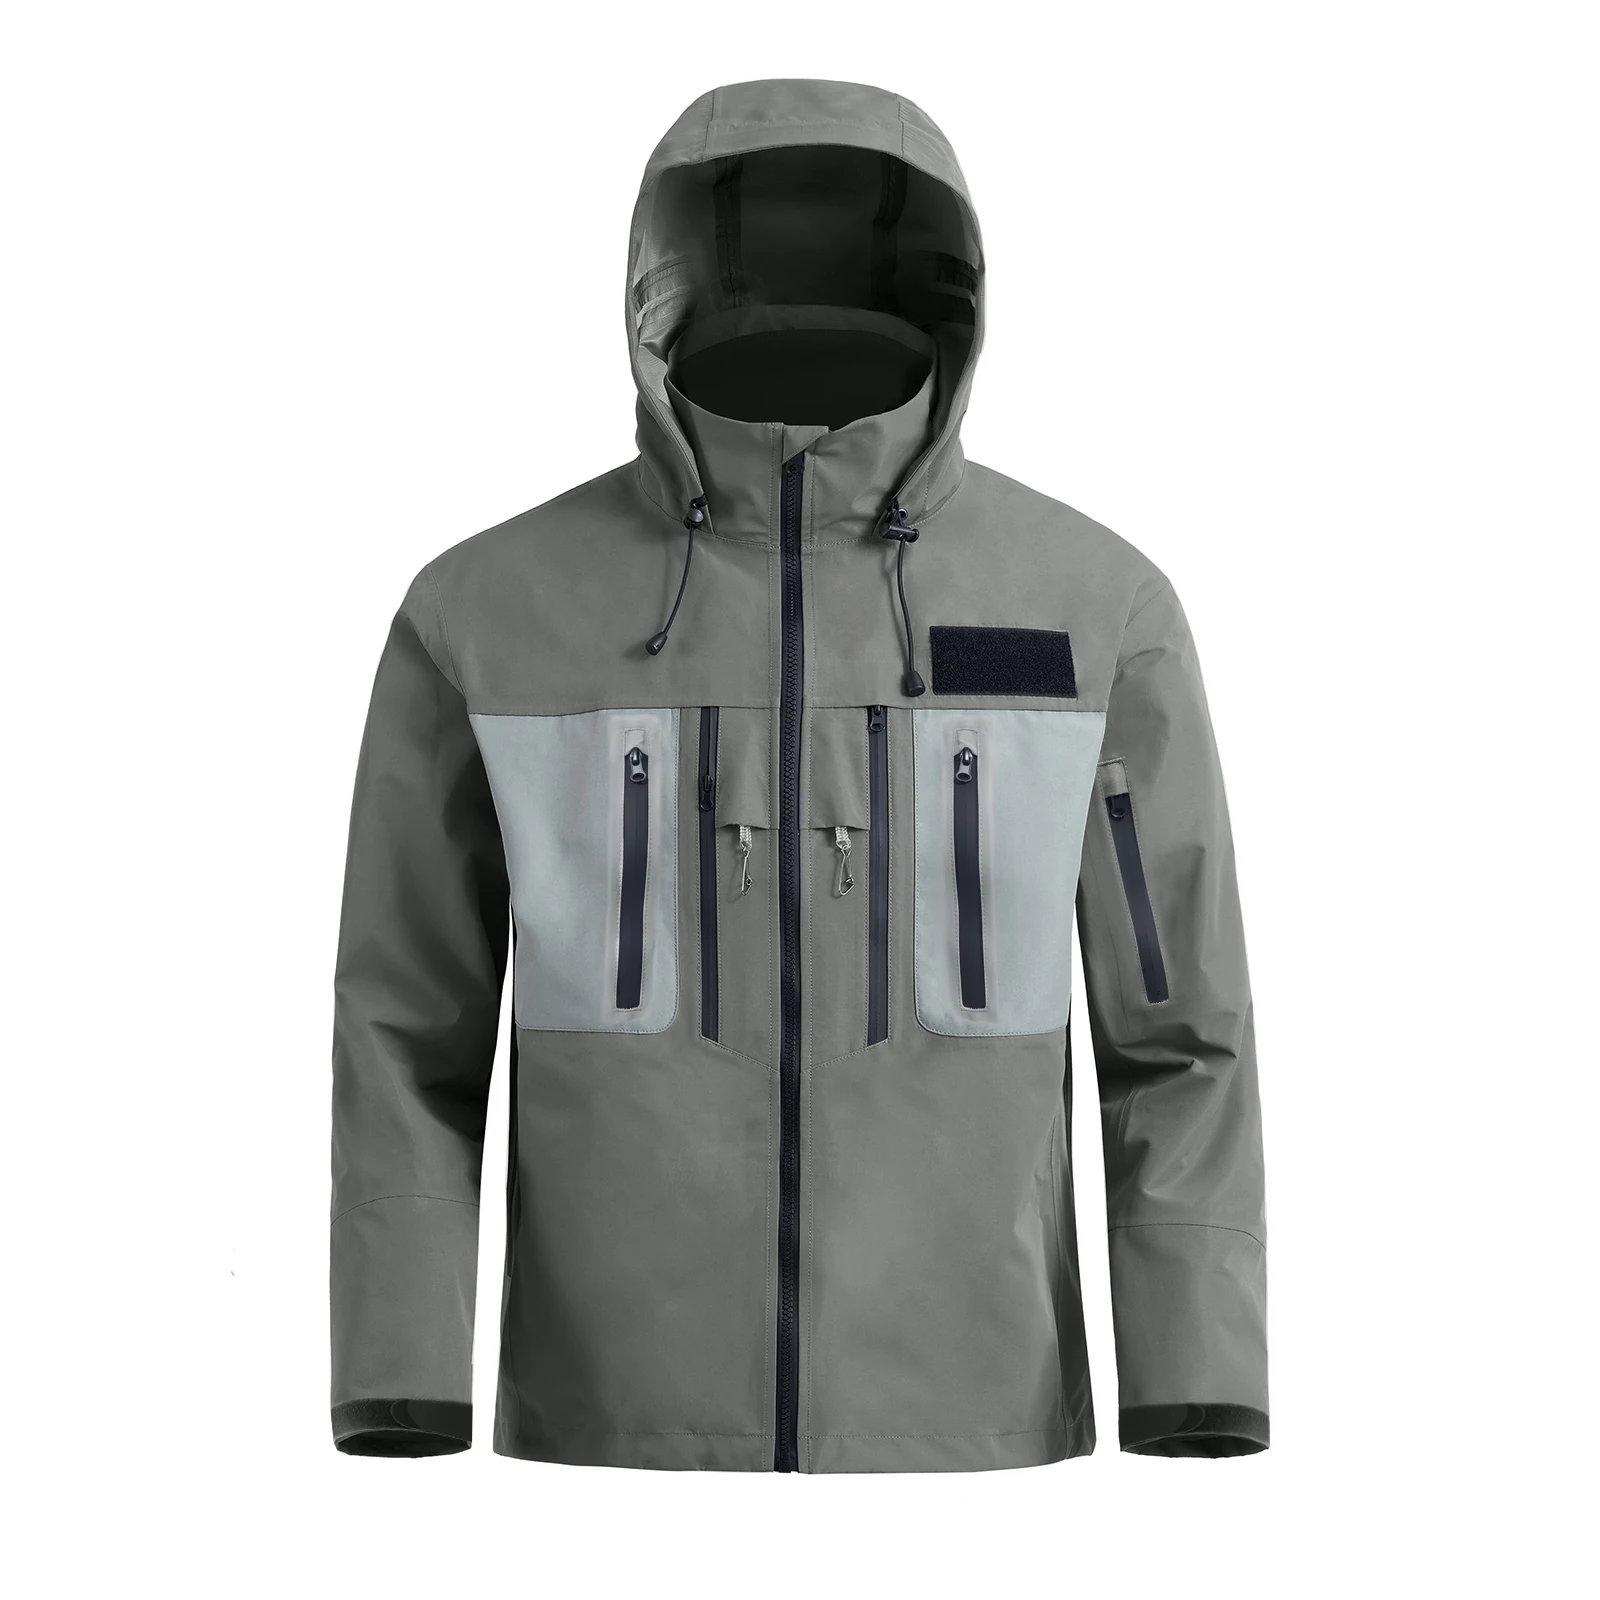 men's-waterproof-jacket-for-fishing-hiking-hunting-3-layers-material-with-hood-underarm-breathable-zipper-fj-29